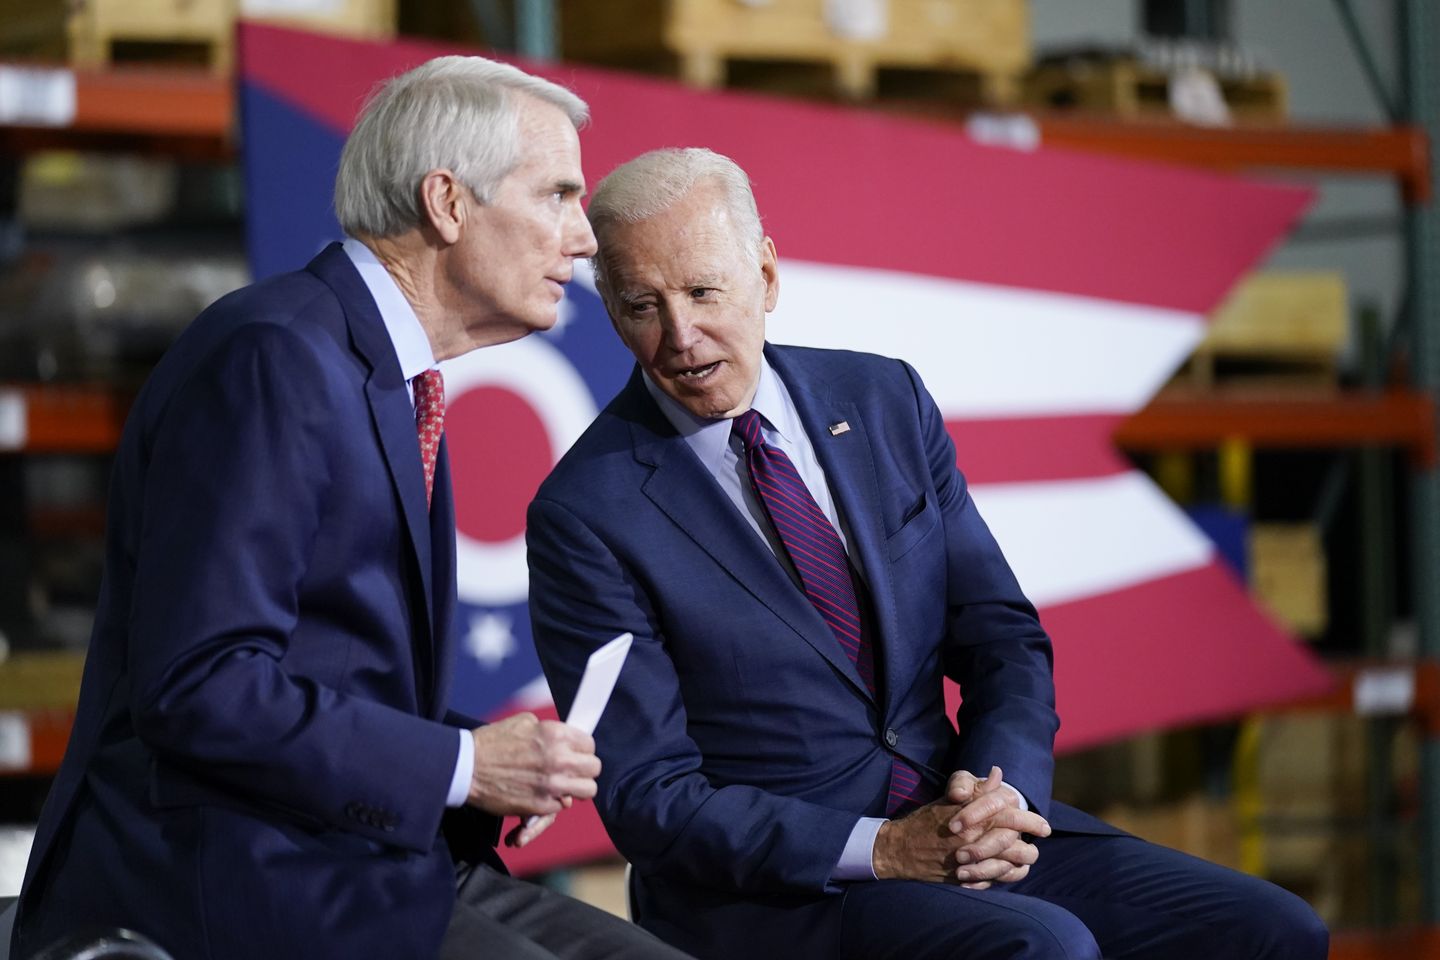 Biden reminisces about bipartisan camaraderie with segregationists during Ohio swing